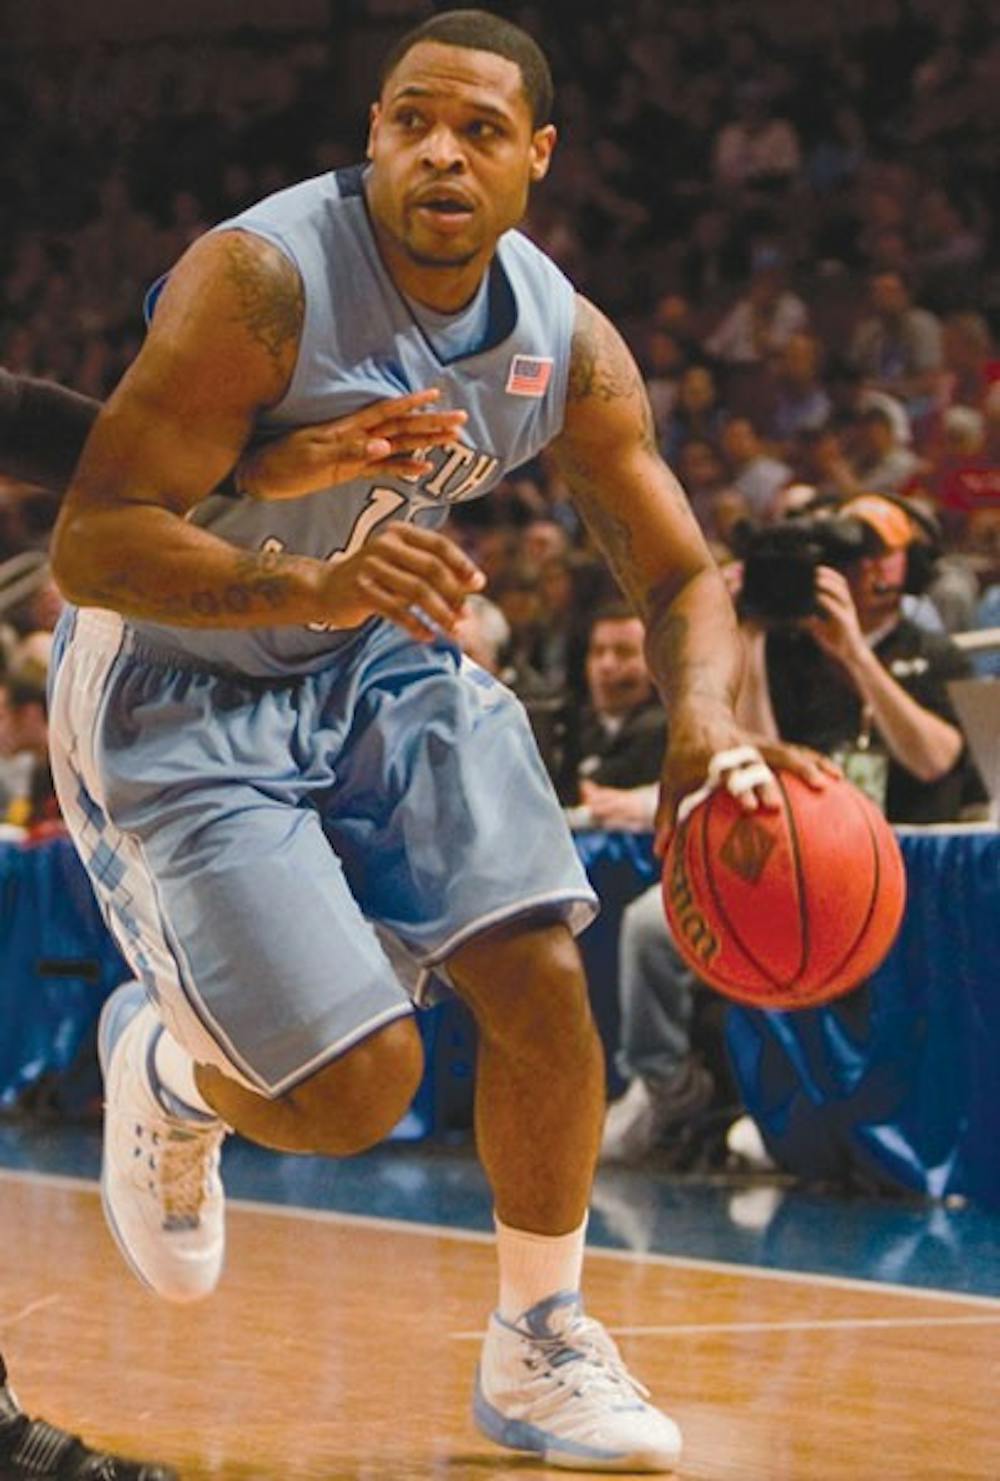 North Carolina junior Will Graves scored a team-high 25 points in UNC’s 79-68 loss to Dayton.  DTH Photos/Katherine Vance